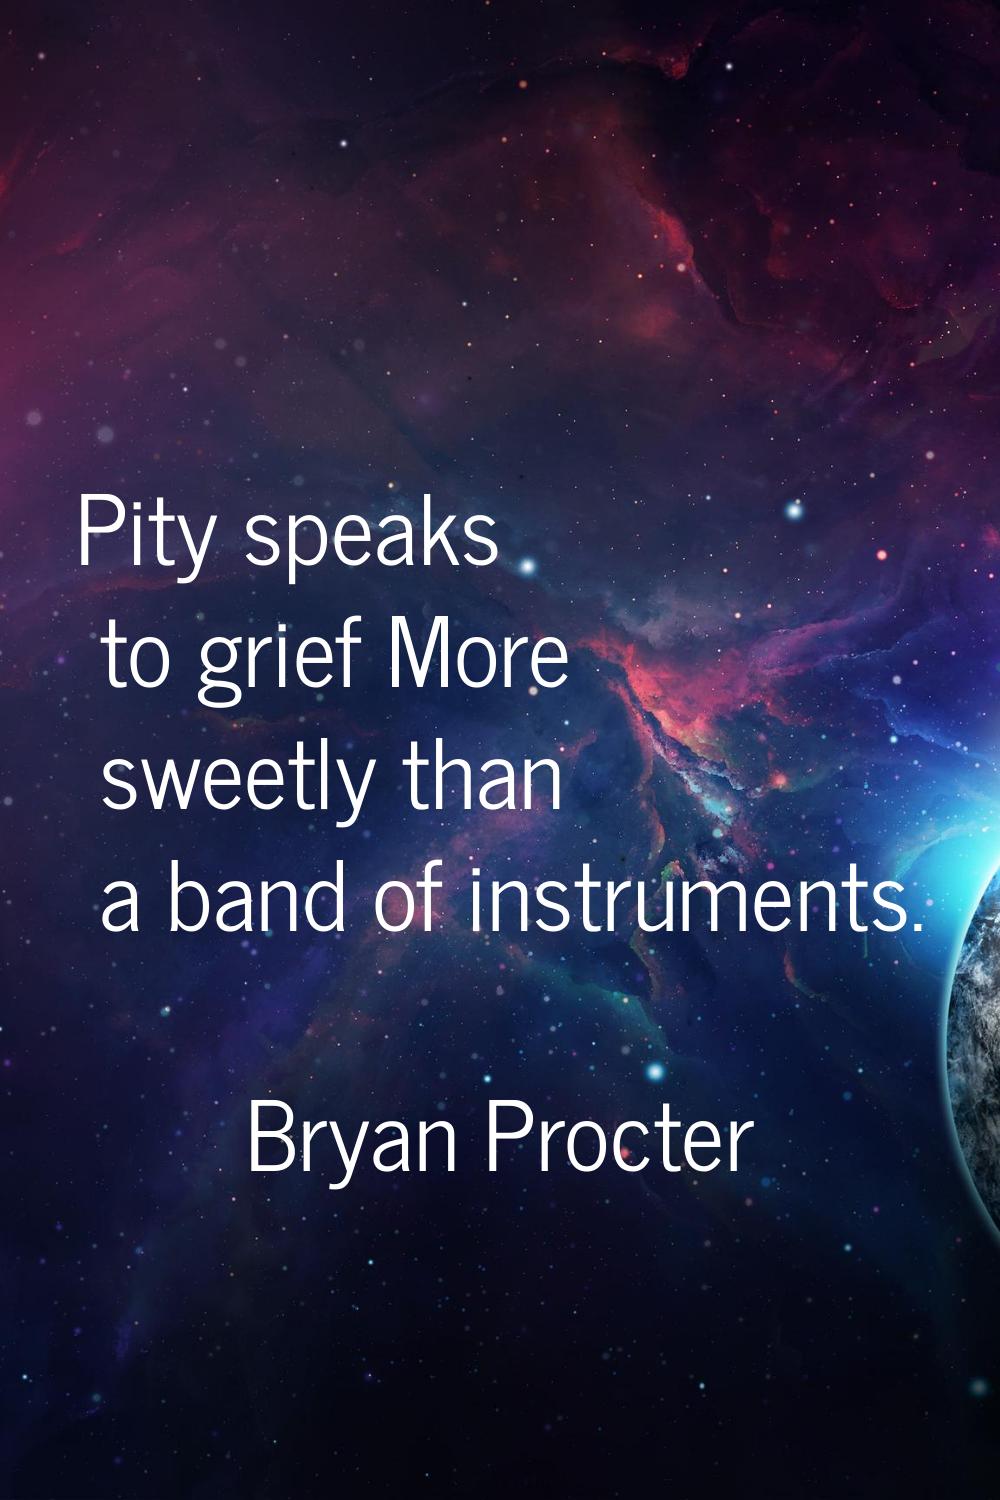 Pity speaks to grief More sweetly than a band of instruments.